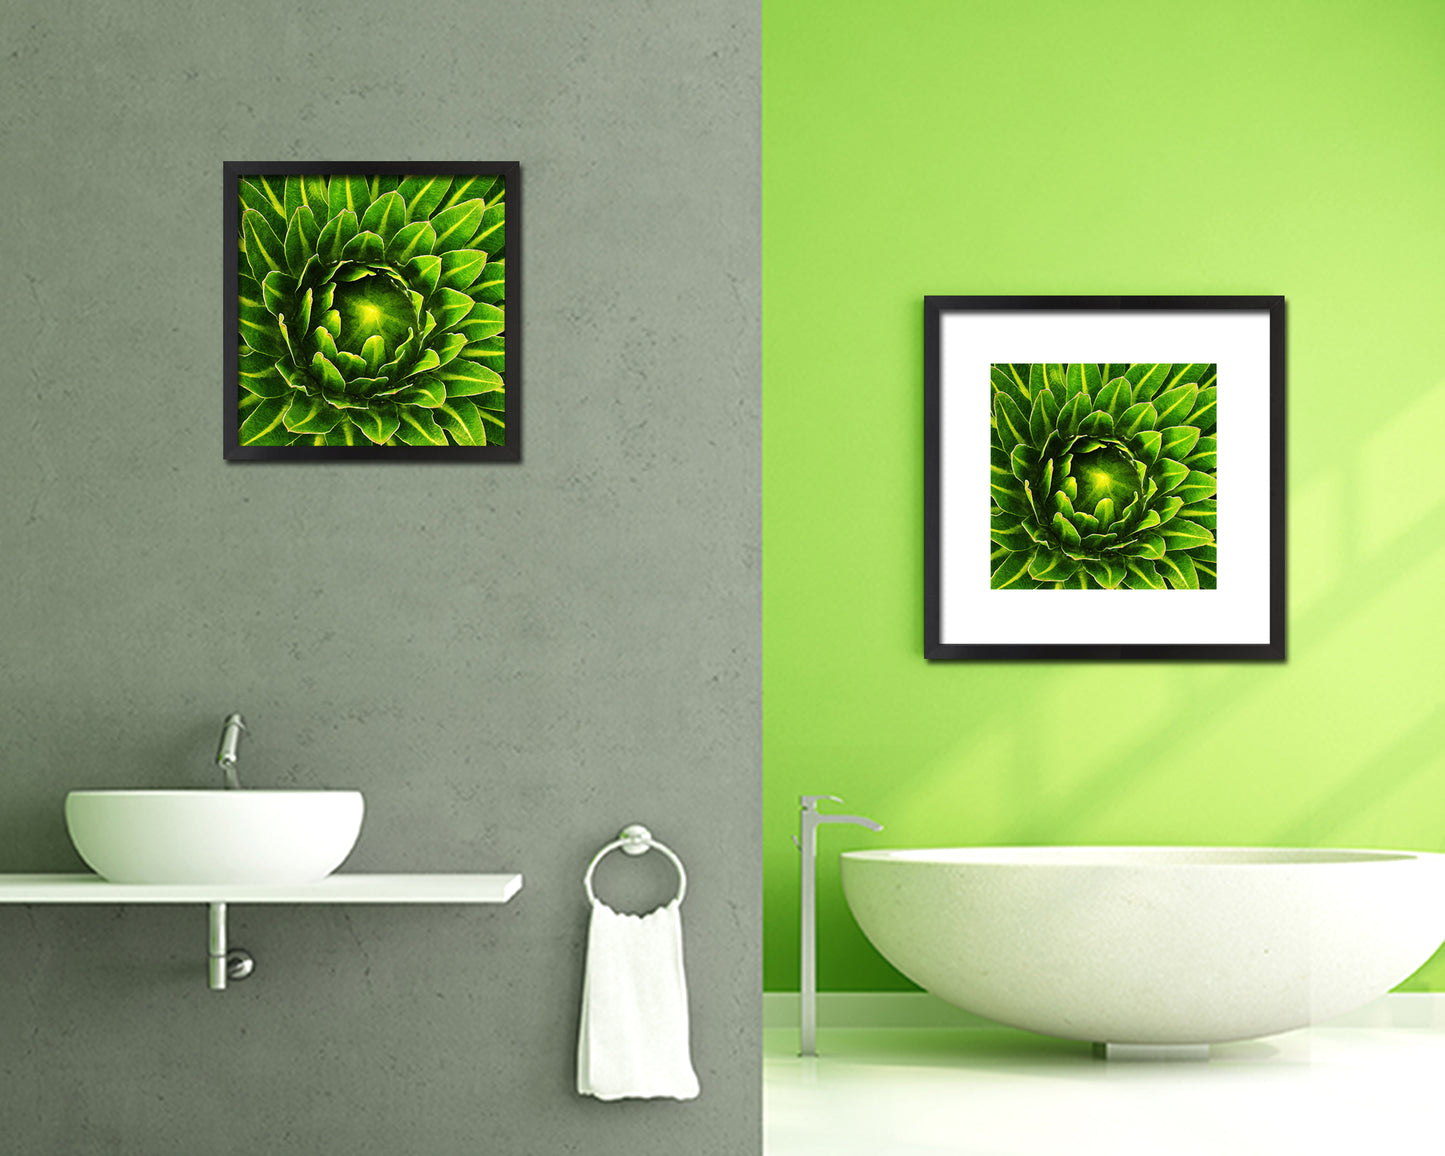 The Cactus Bud of Plant Evergreen Succulent Leaves Spiral Plant Framed Print Home Decor Wall Art